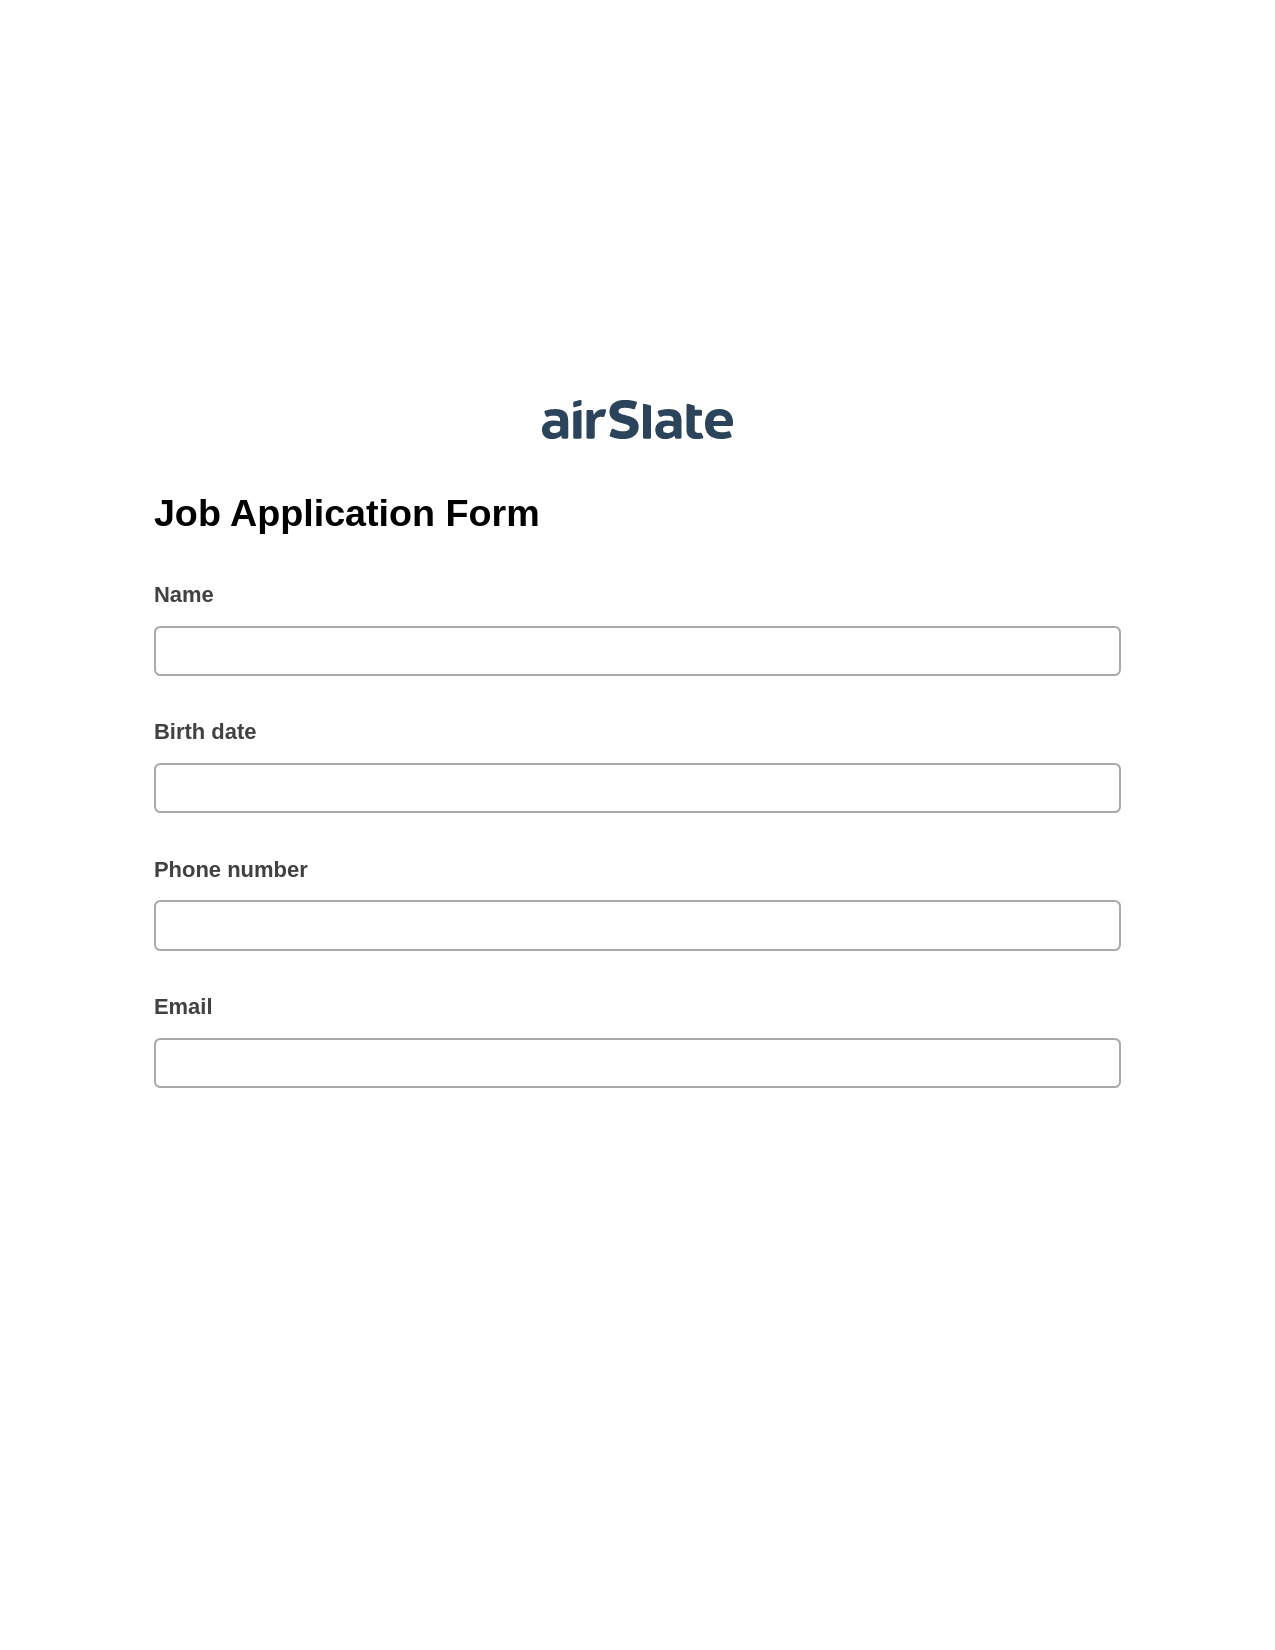 Job Application Form Pre-fill from Google Sheet Dropdown Options Bot, Update Salesforce Record Bot, Export to Salesforce Bot